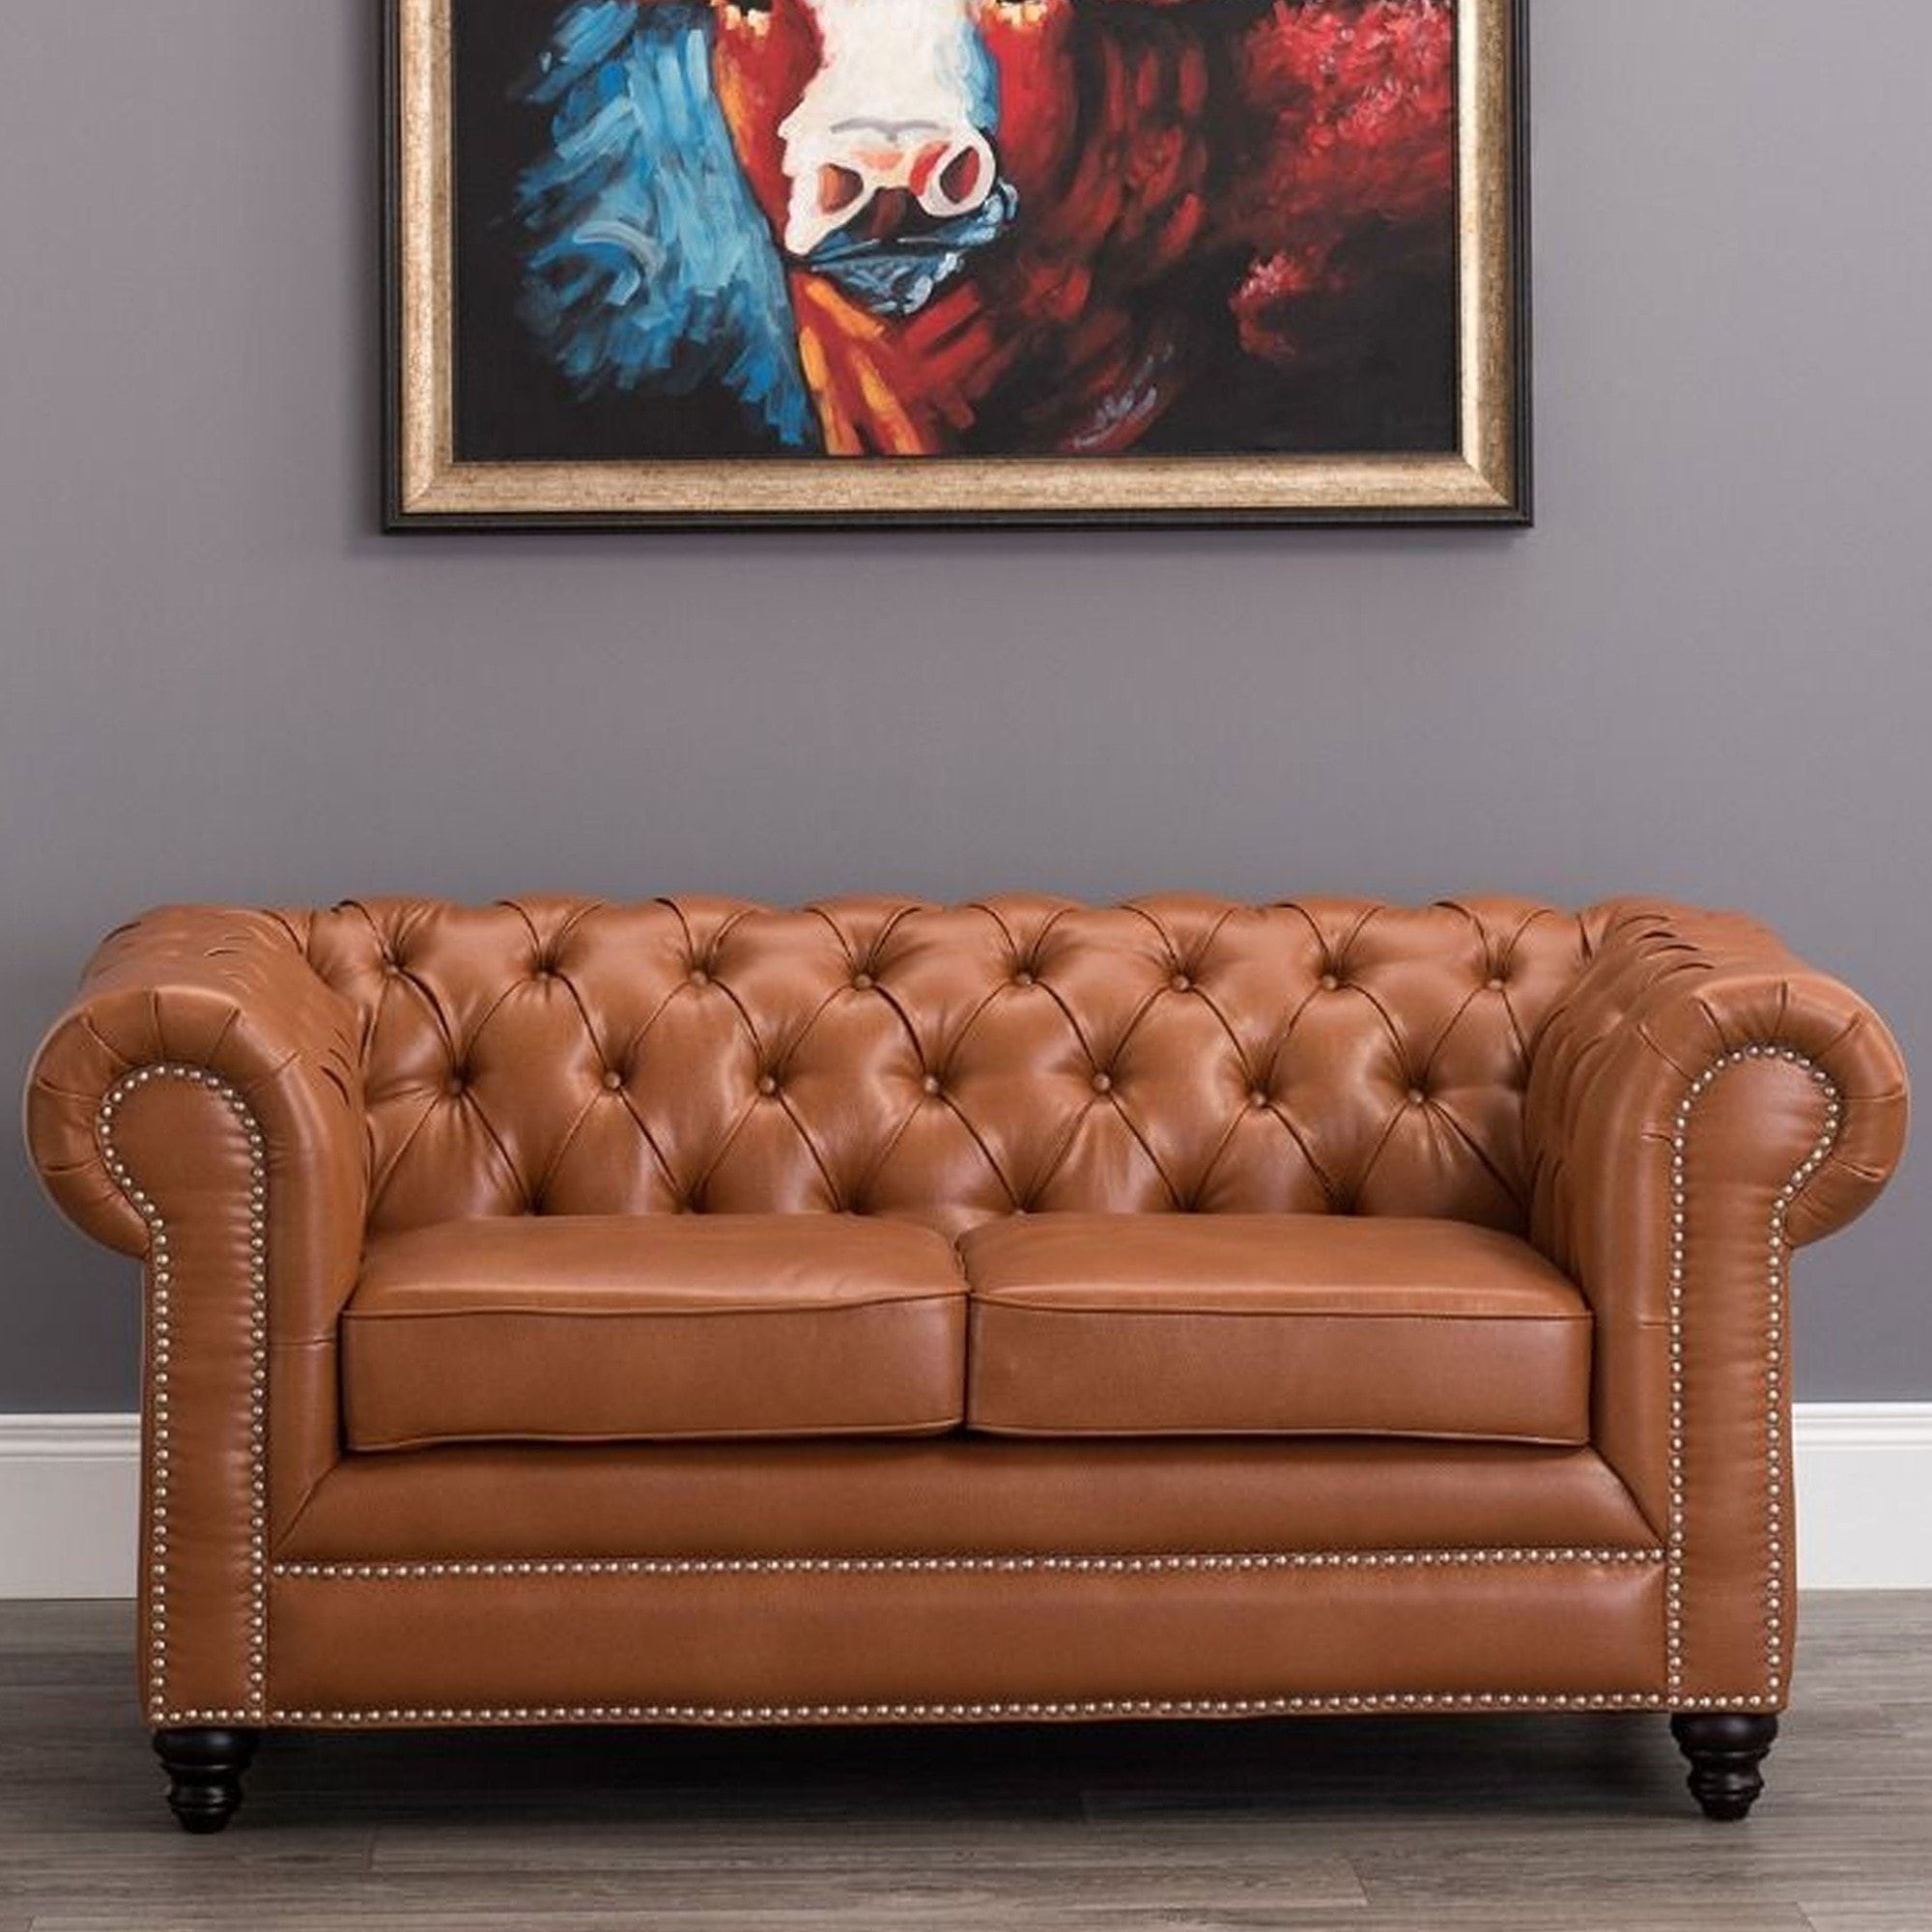 Faux Leather Chesterfield 2 Seater Sofa Tan | Tan Chesterfield Sofa Inside Faux Leather Sofas (Gallery 17 of 21)